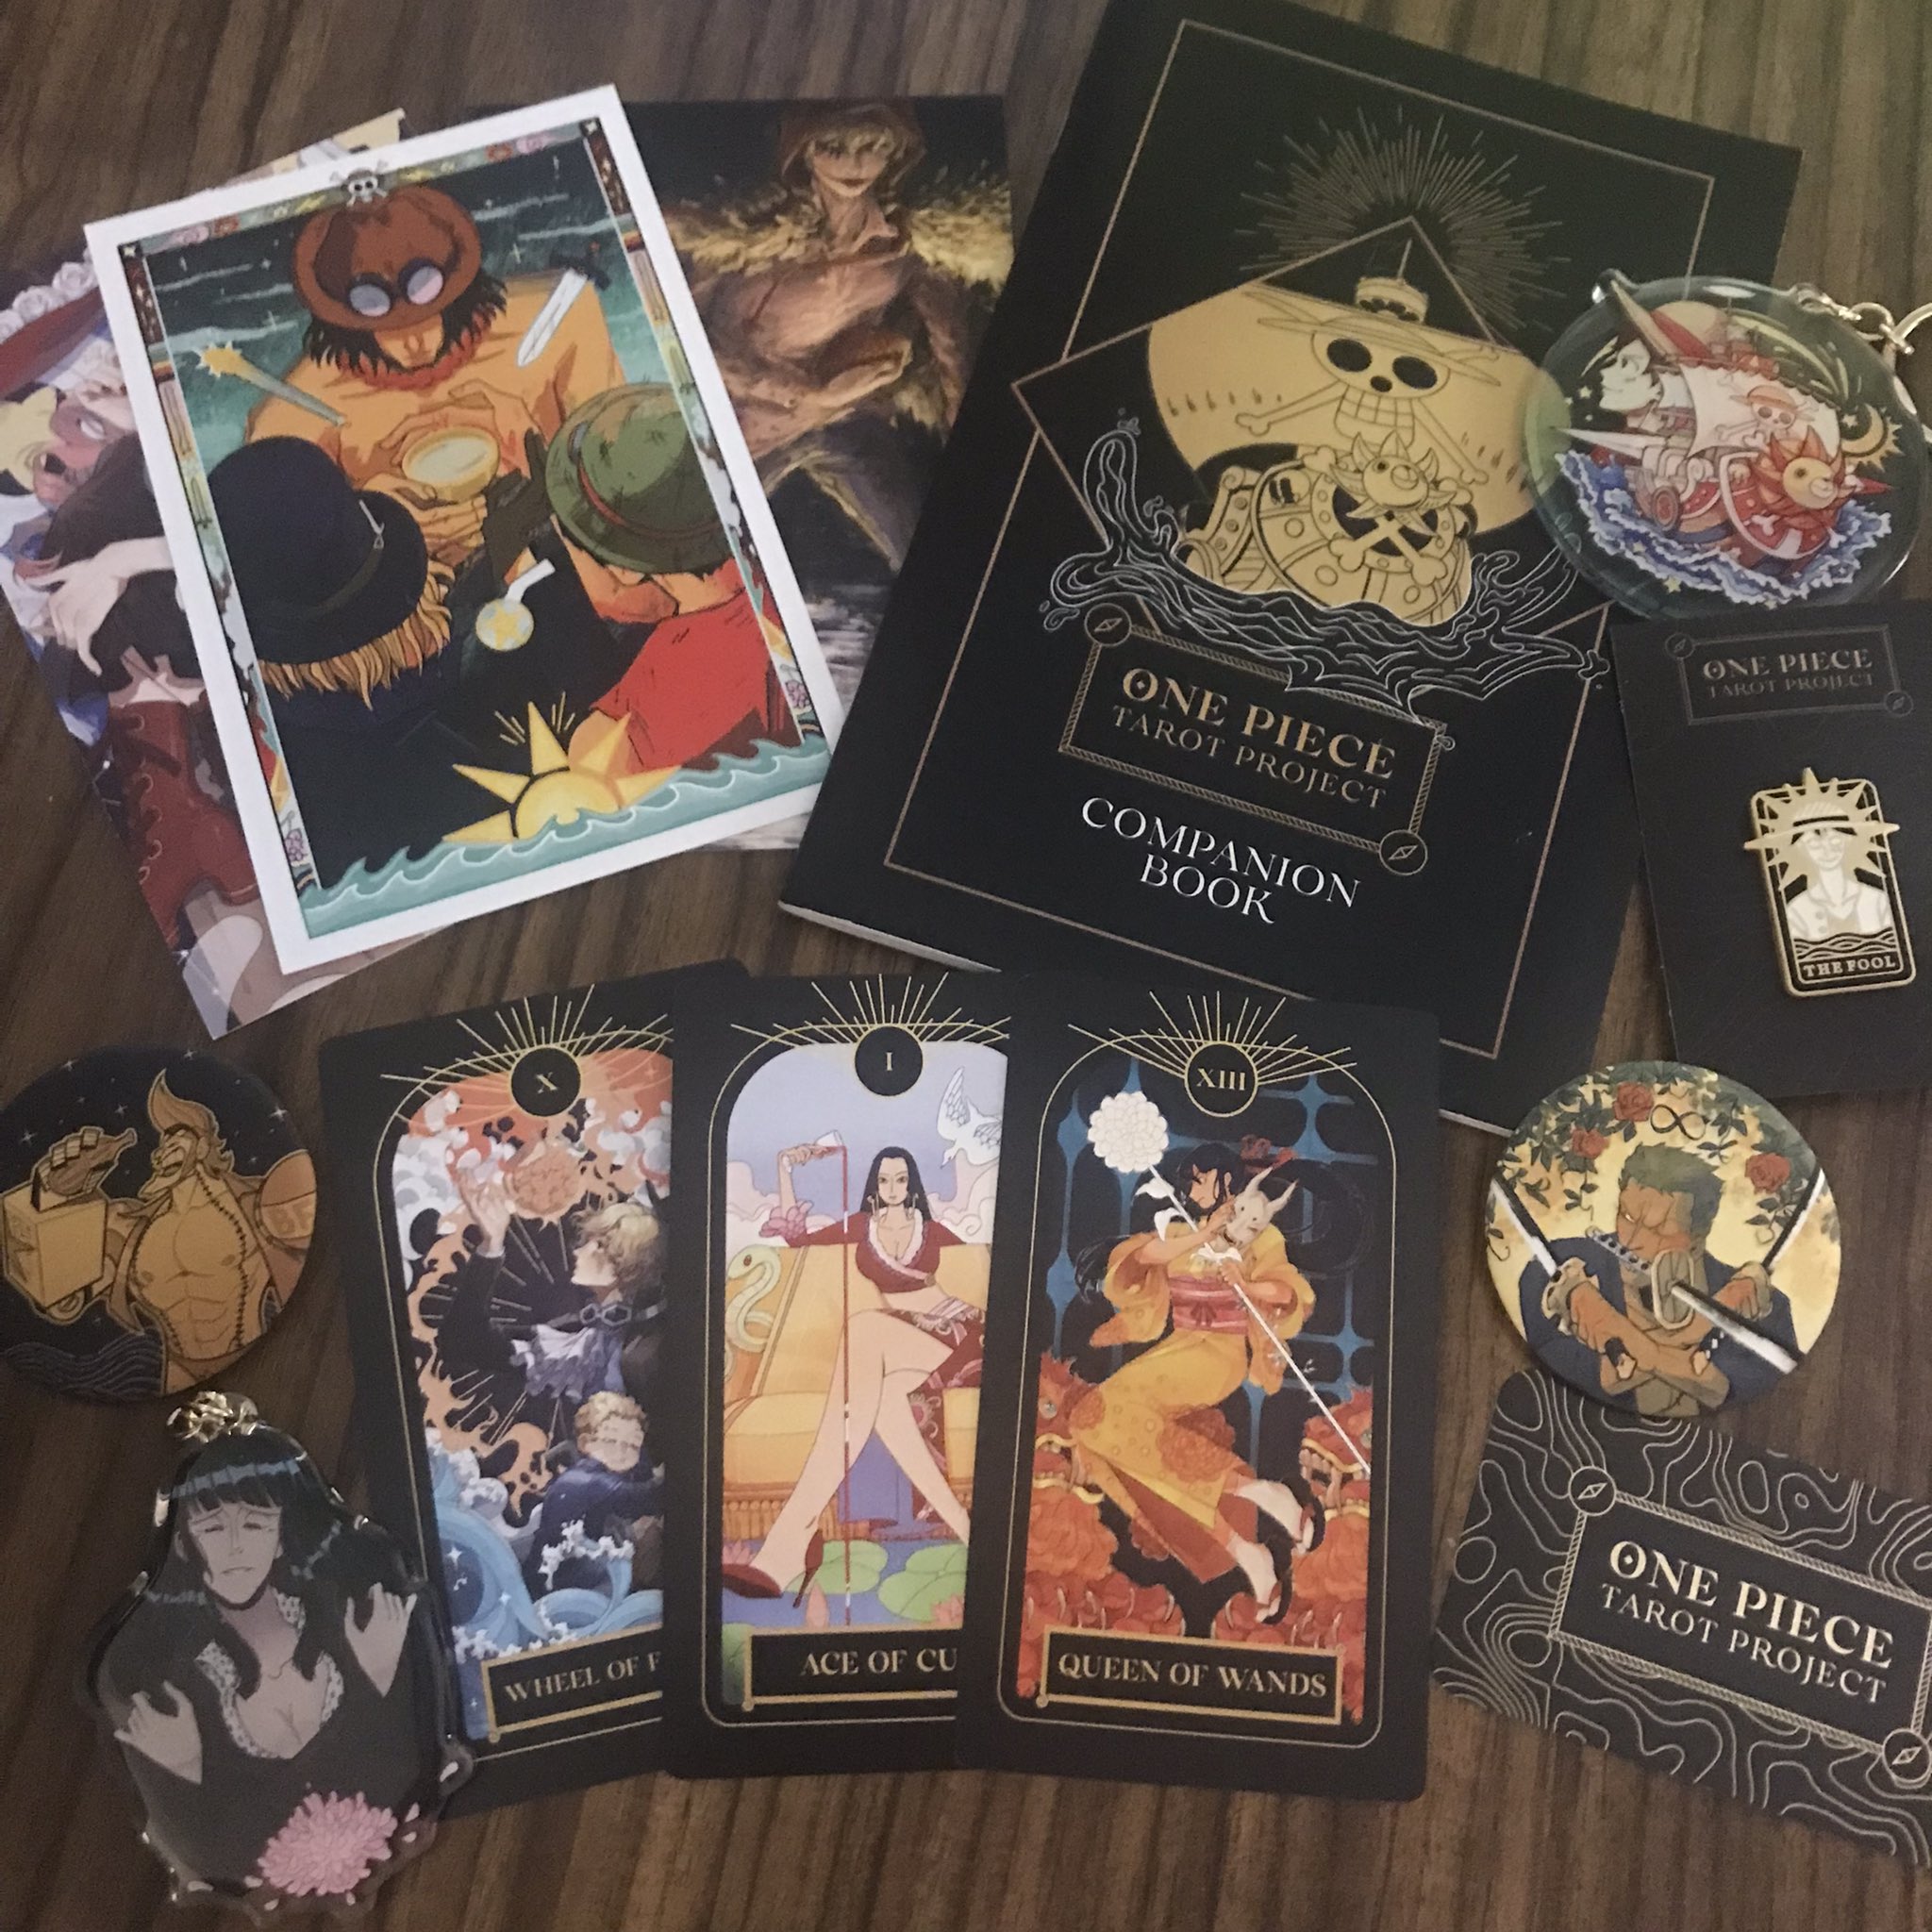 One Piece Tarot Project came in the mail today : r/OnePiece